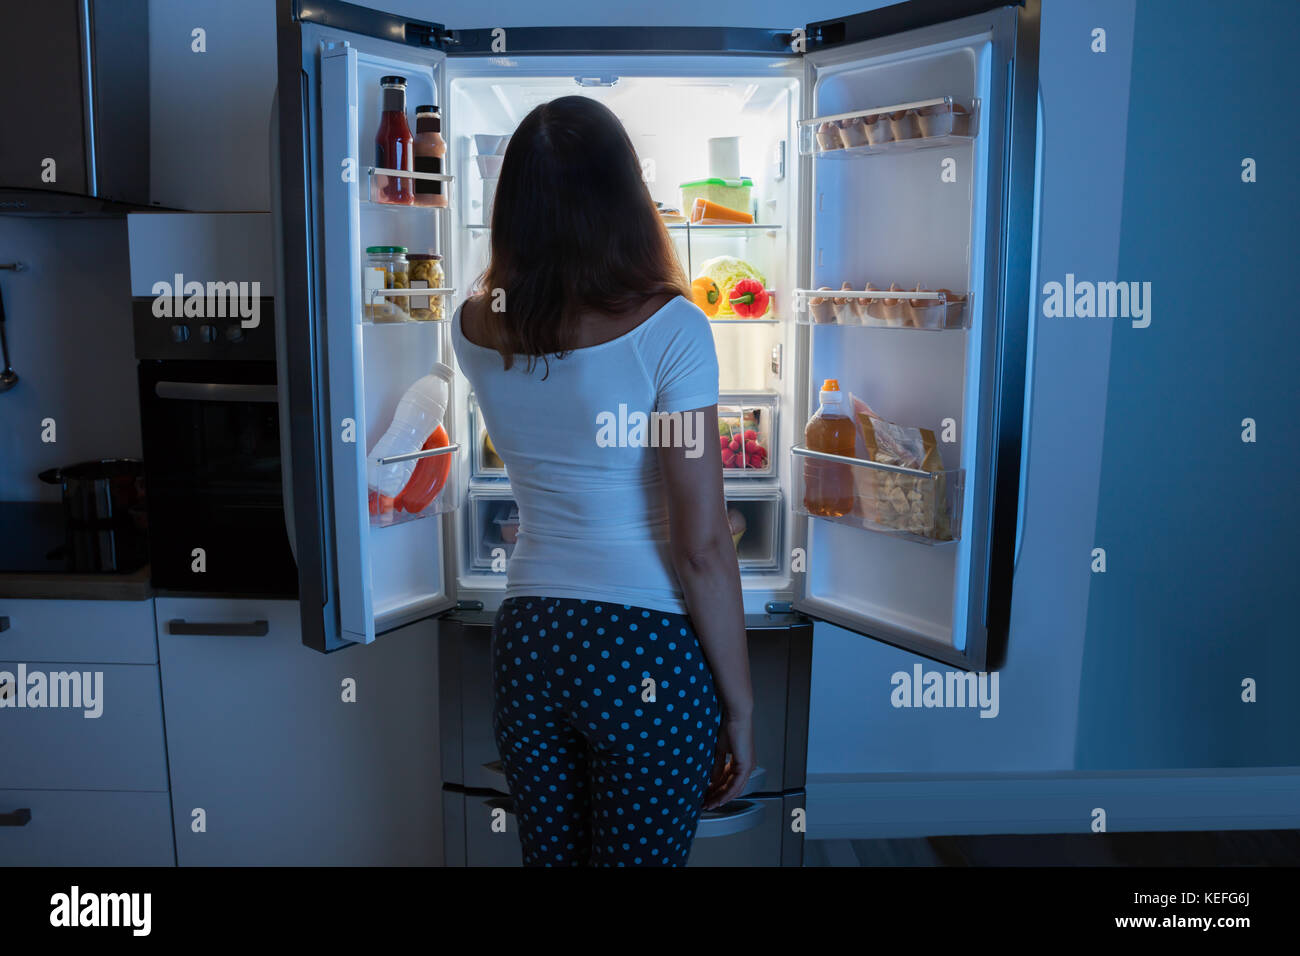 Rear View Of Young Woman Looking In Fridge At Kitchen Stock Photo